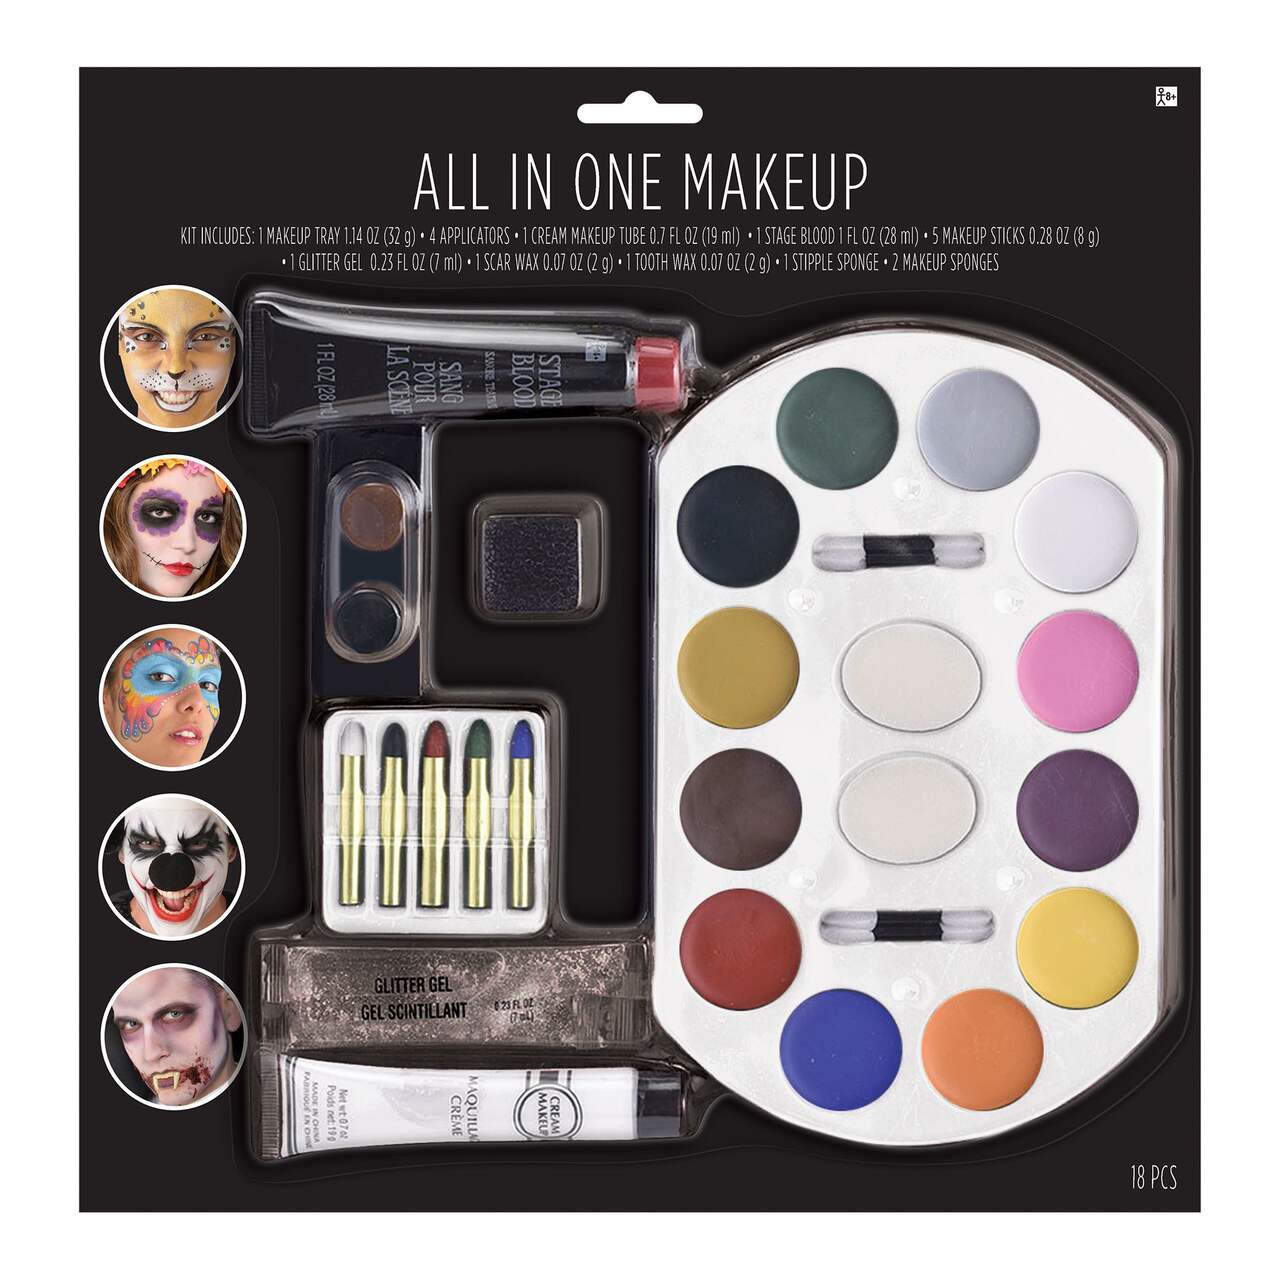 All-In-One Face Makeup Kit with Blood, Glitter & Crayons, Multi-Coloured,  One Size, 18-pk, Costume Accessories for Halloween